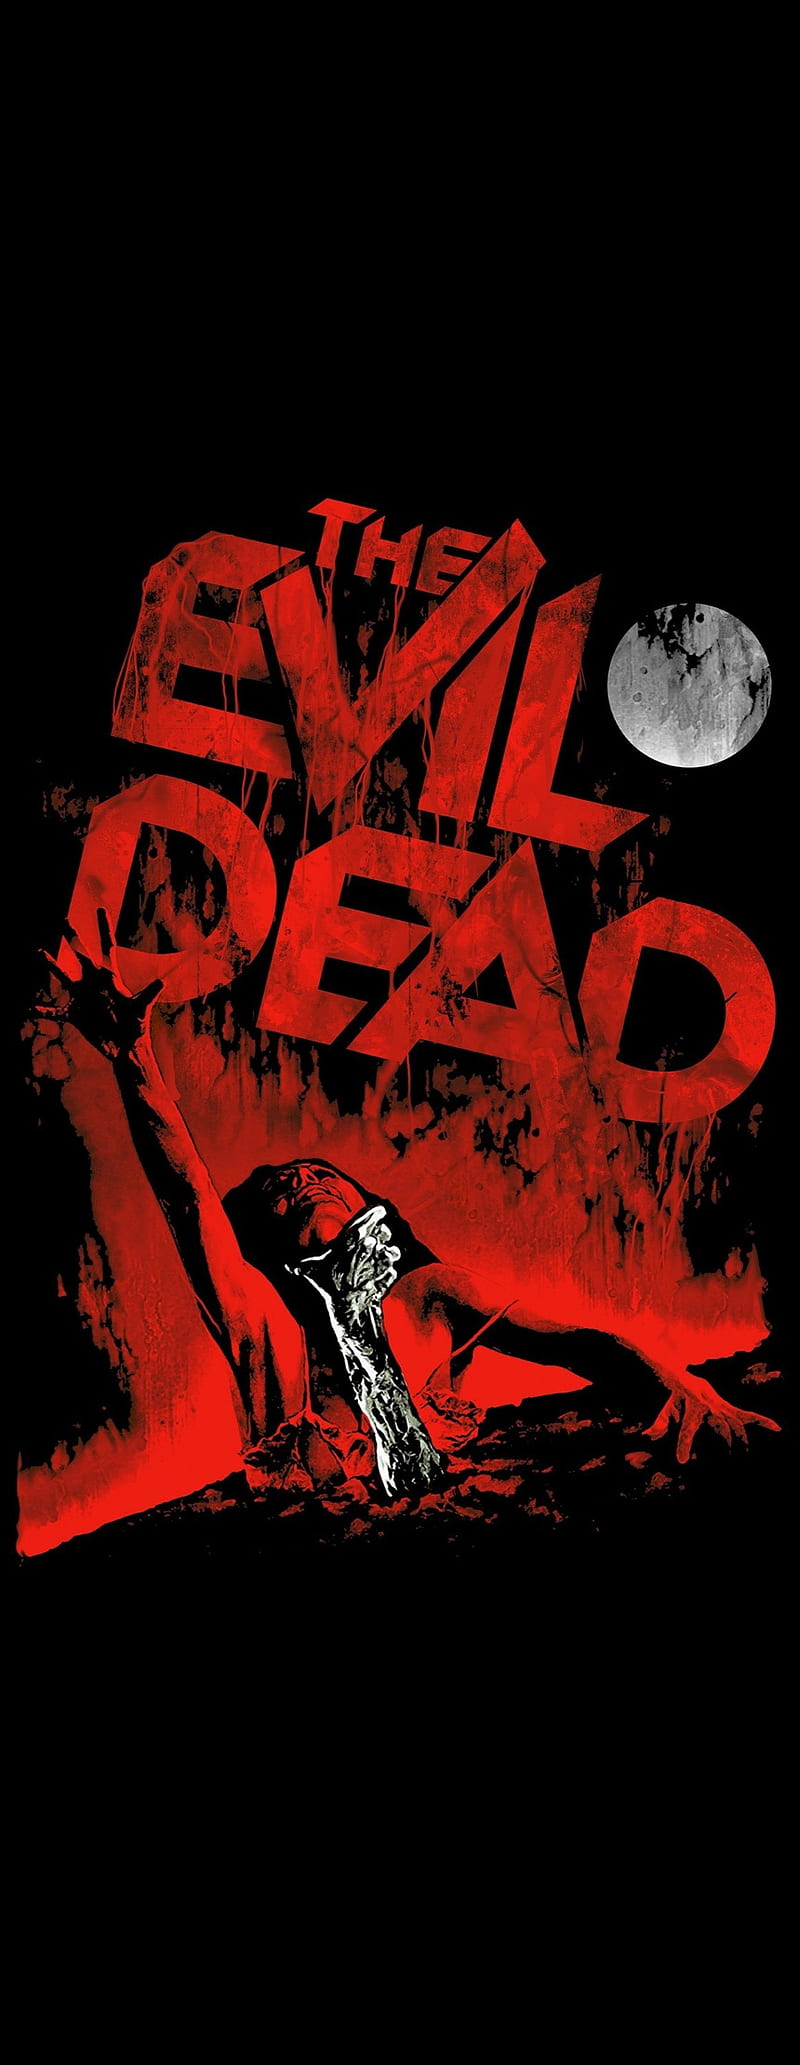 evil dead wallpaper by Cthulhu72  Download on ZEDGE  a011